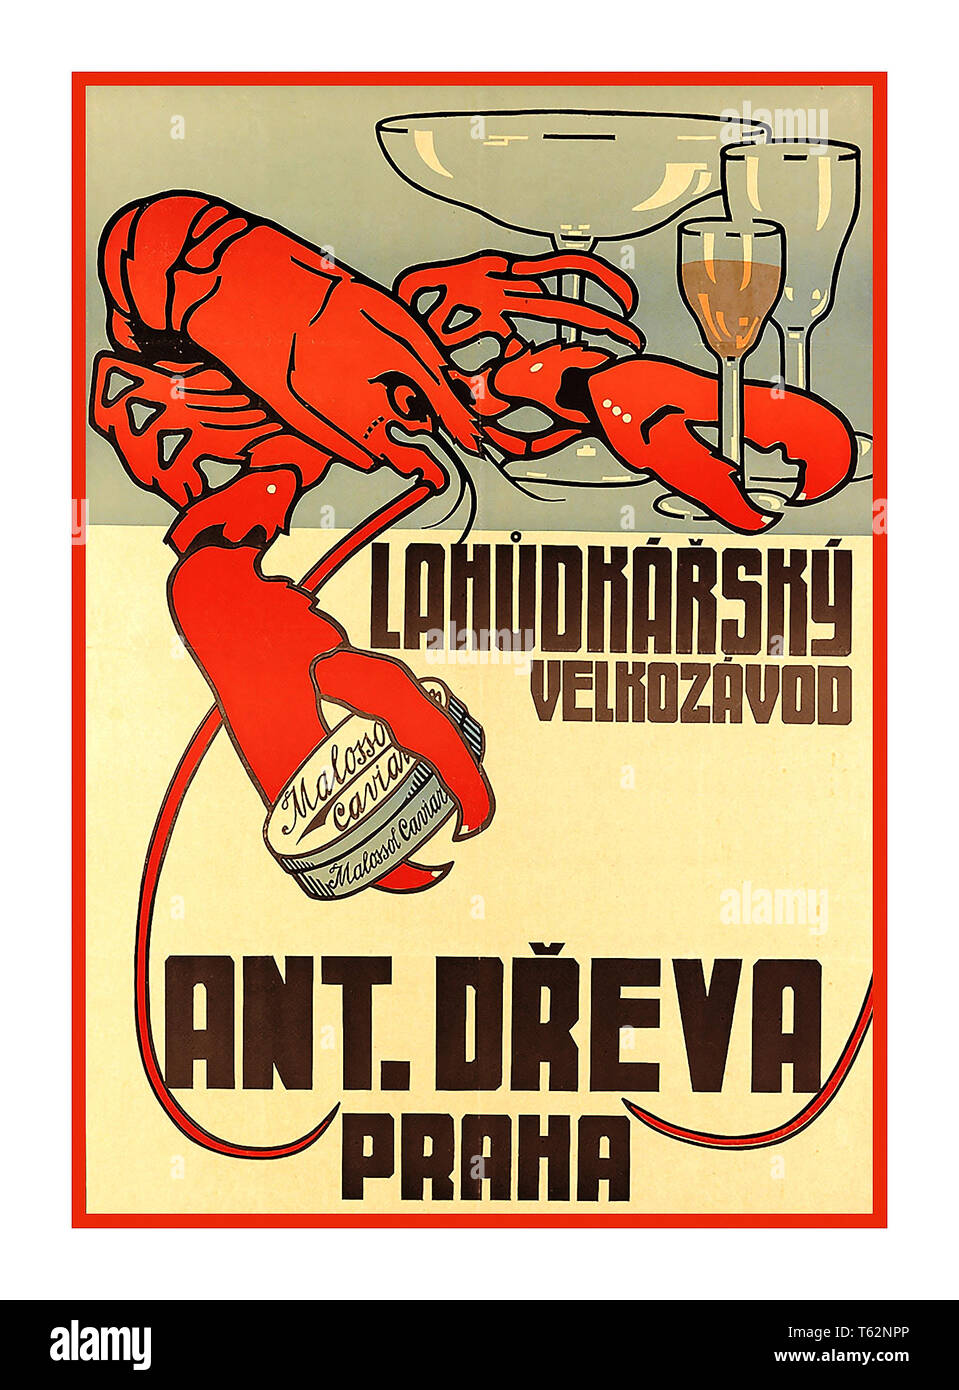 Lobster Caviar Champagne Vintage 1900's Czech food delicacies poster “A Delicious Delight!”  Czech advertising poster promotes the skills that produce Ant Dřeva’s luxury delicacies such as caviar, lobster and wine. Prague Czechoslovakia artist Vojtěch Holman (Czech, born 1875) Stock Photo